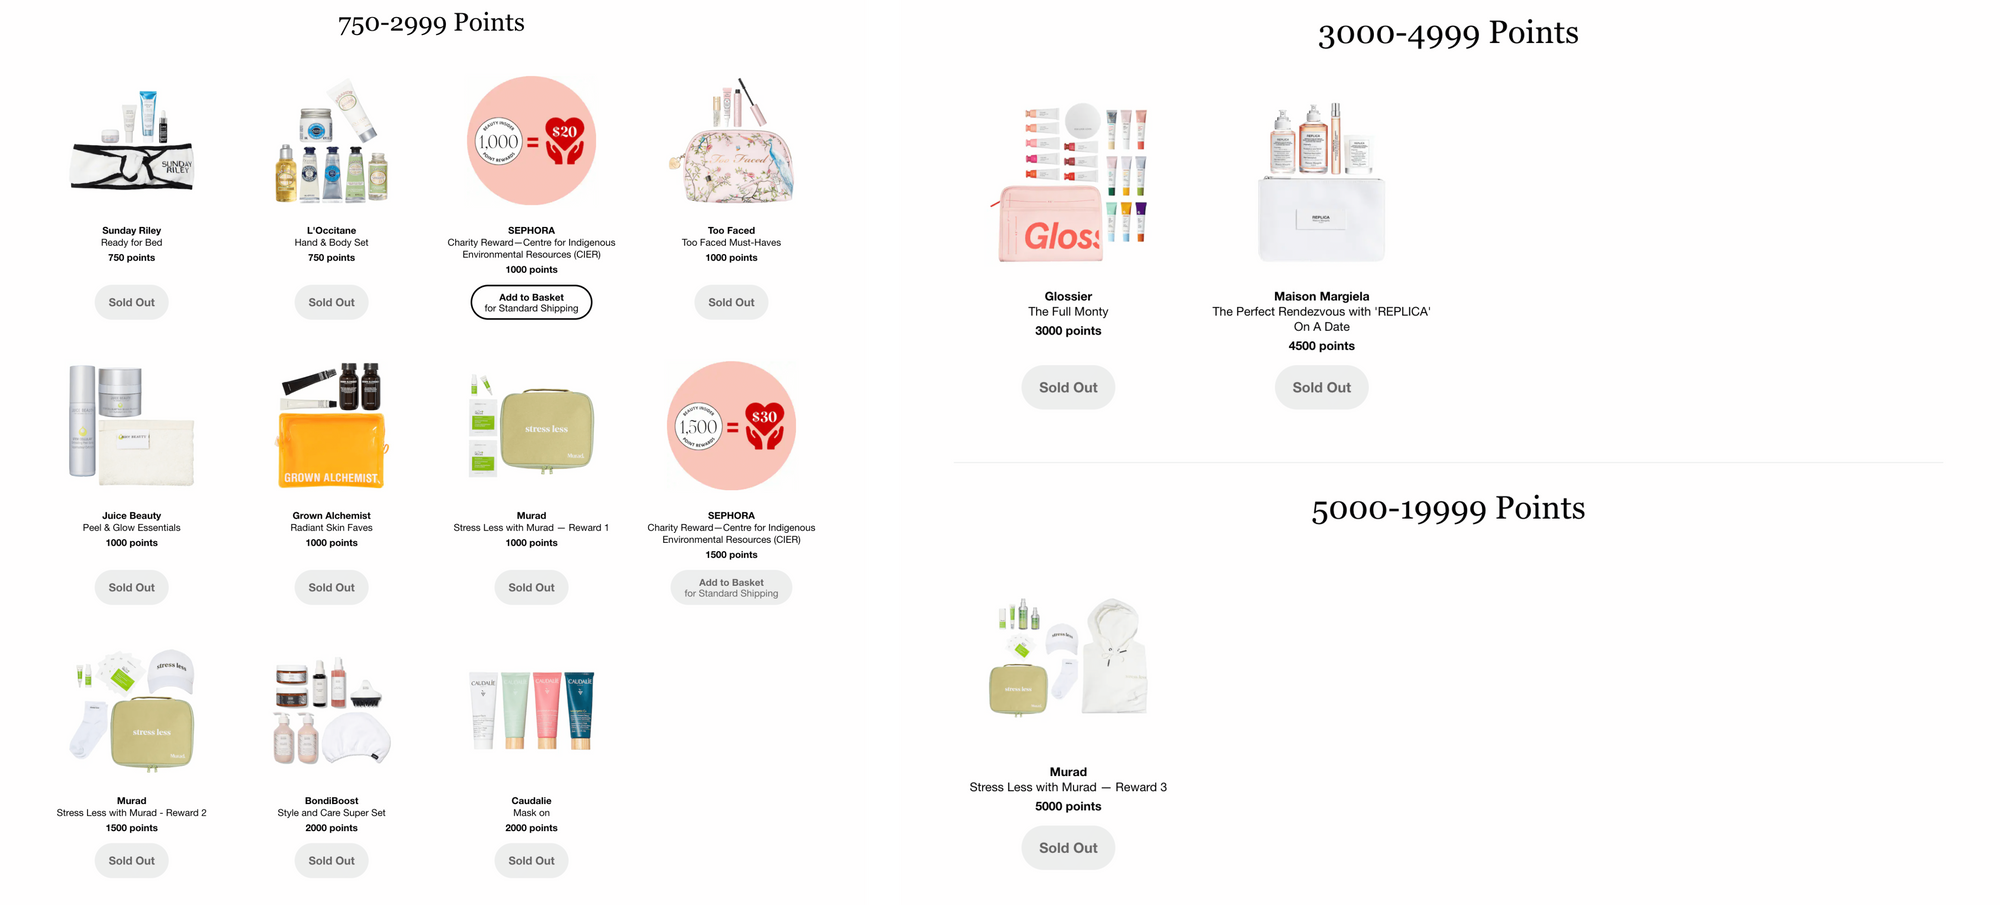 A screenshot from Sephora’s website showing all of the rewards redeemable for 750-2999 points, 3000-4999 points, and 5000-19999 points. There are 14 rewards shown and all are sold out except for the $20 and $30 charitable donation options. 